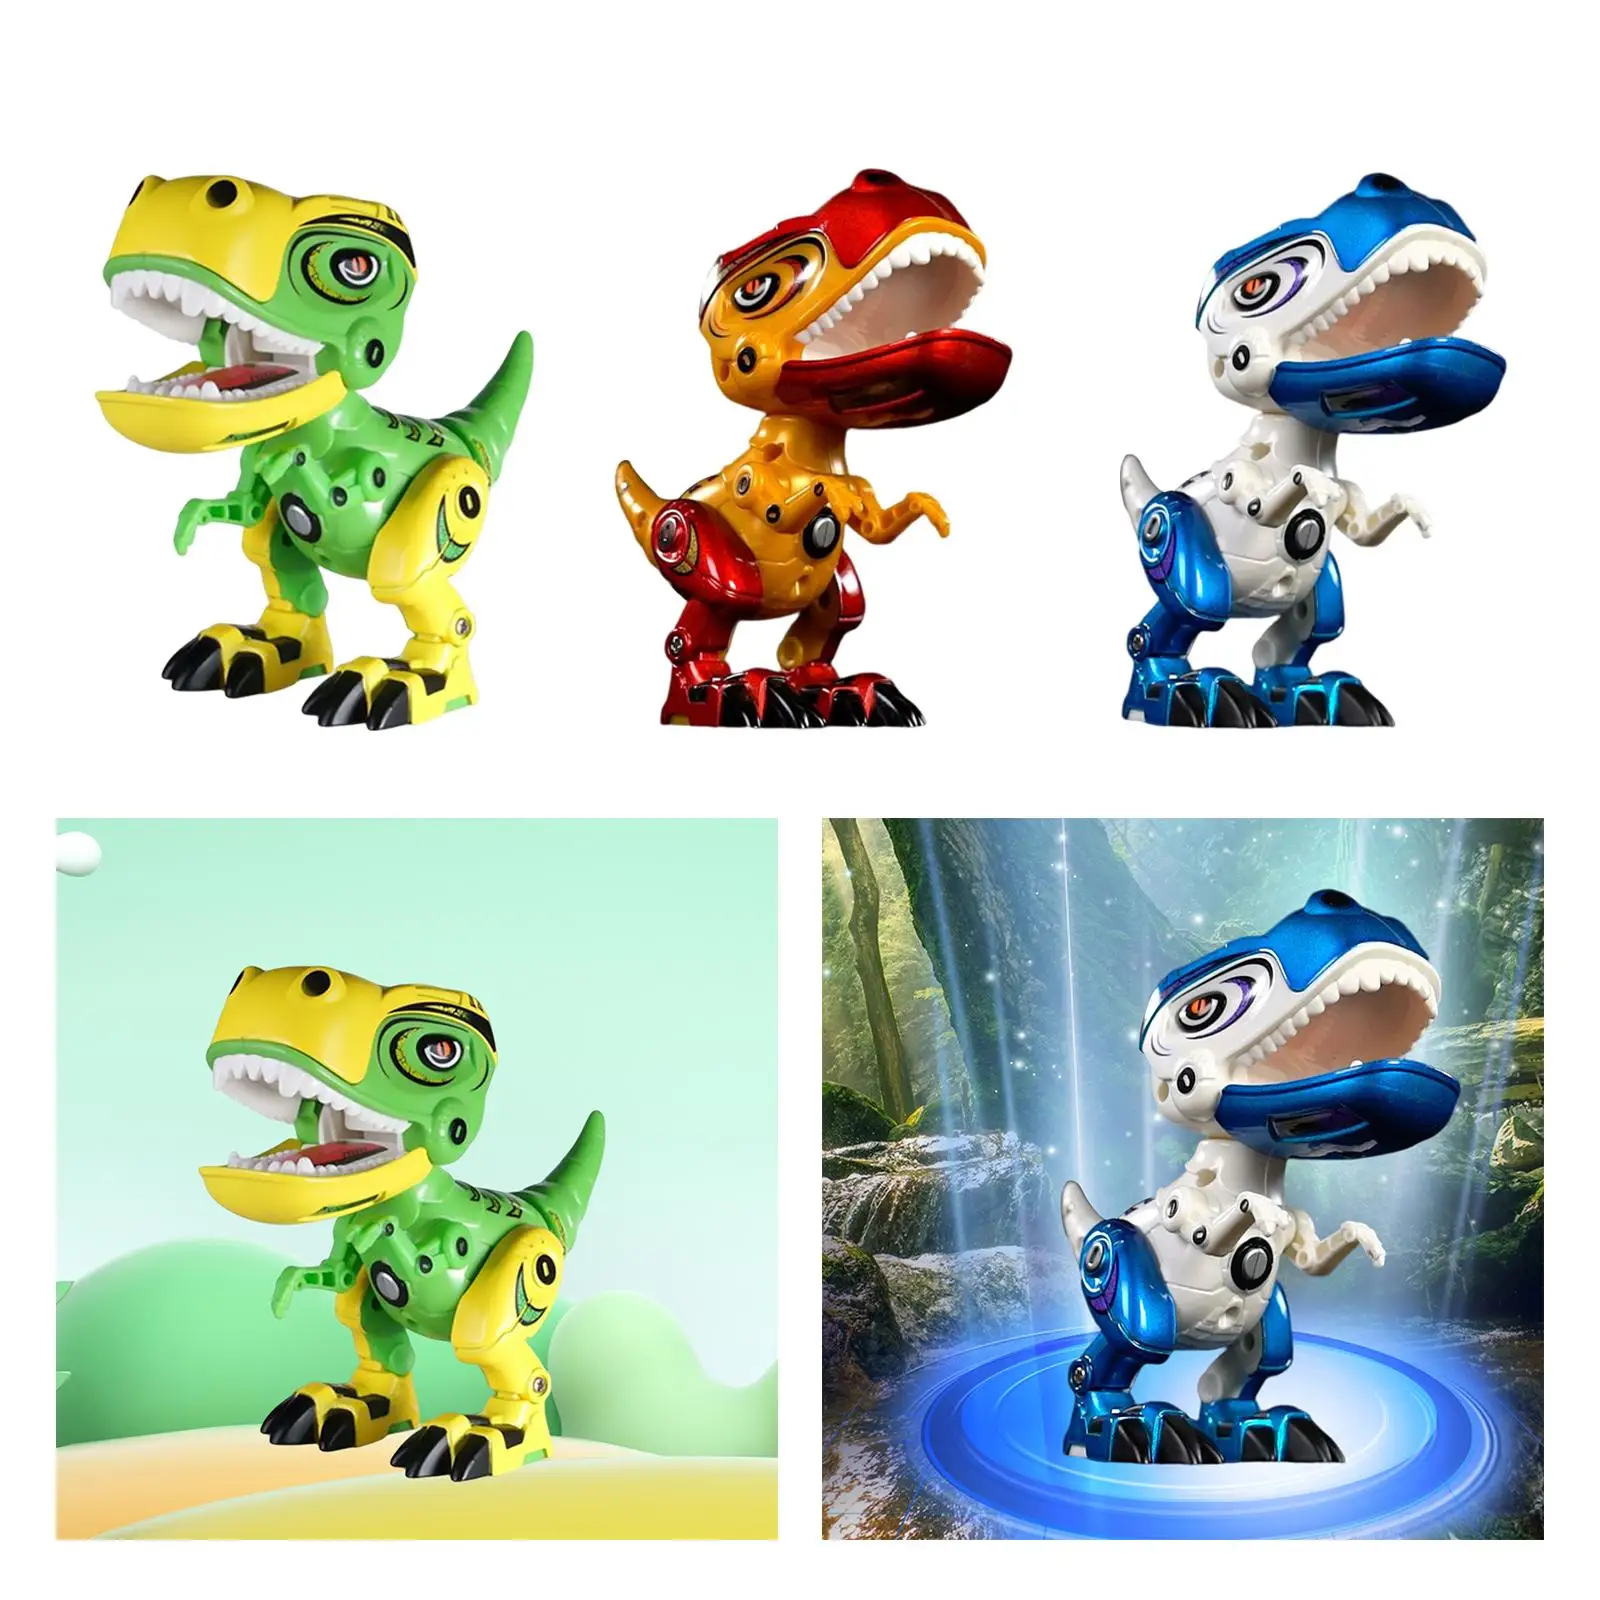 Electric Dinosaur Animals Toy Dinosaur Action Toy Early Learning Education Toy with Sound and Light for Toddlers Kids Children